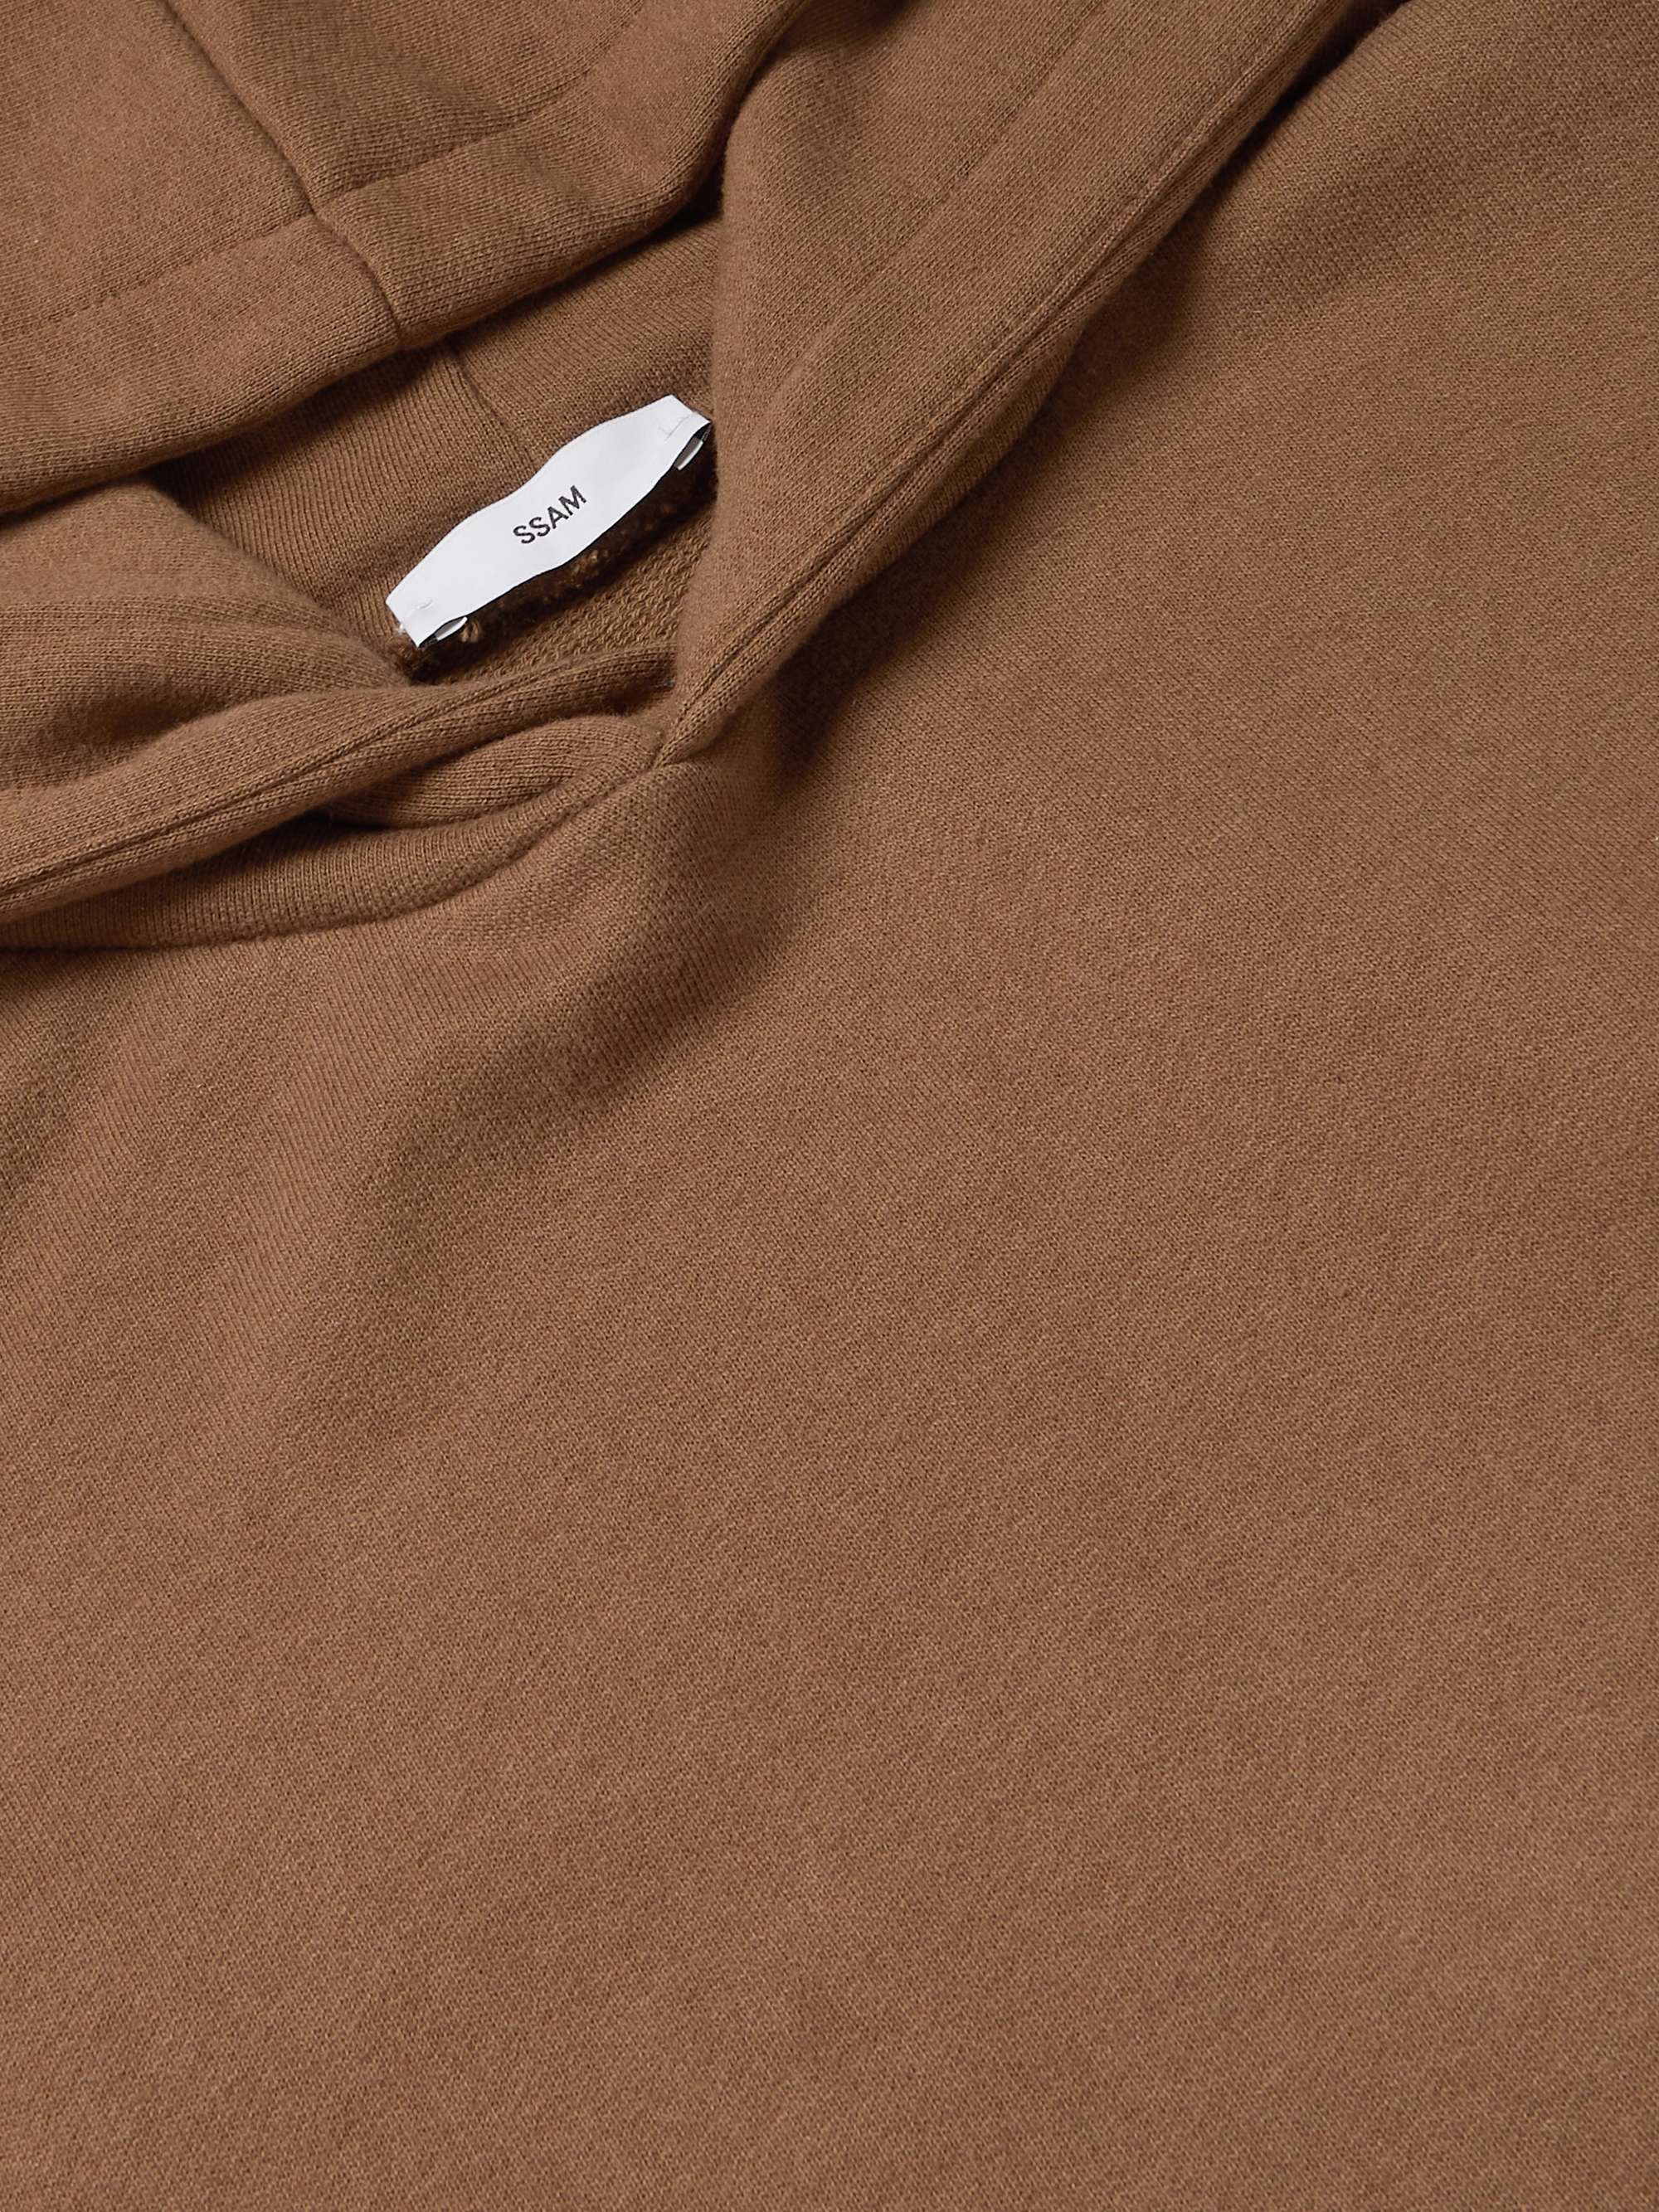 SSAM Recycled Cotton and Cashmere-Blend Jersey Hoodie